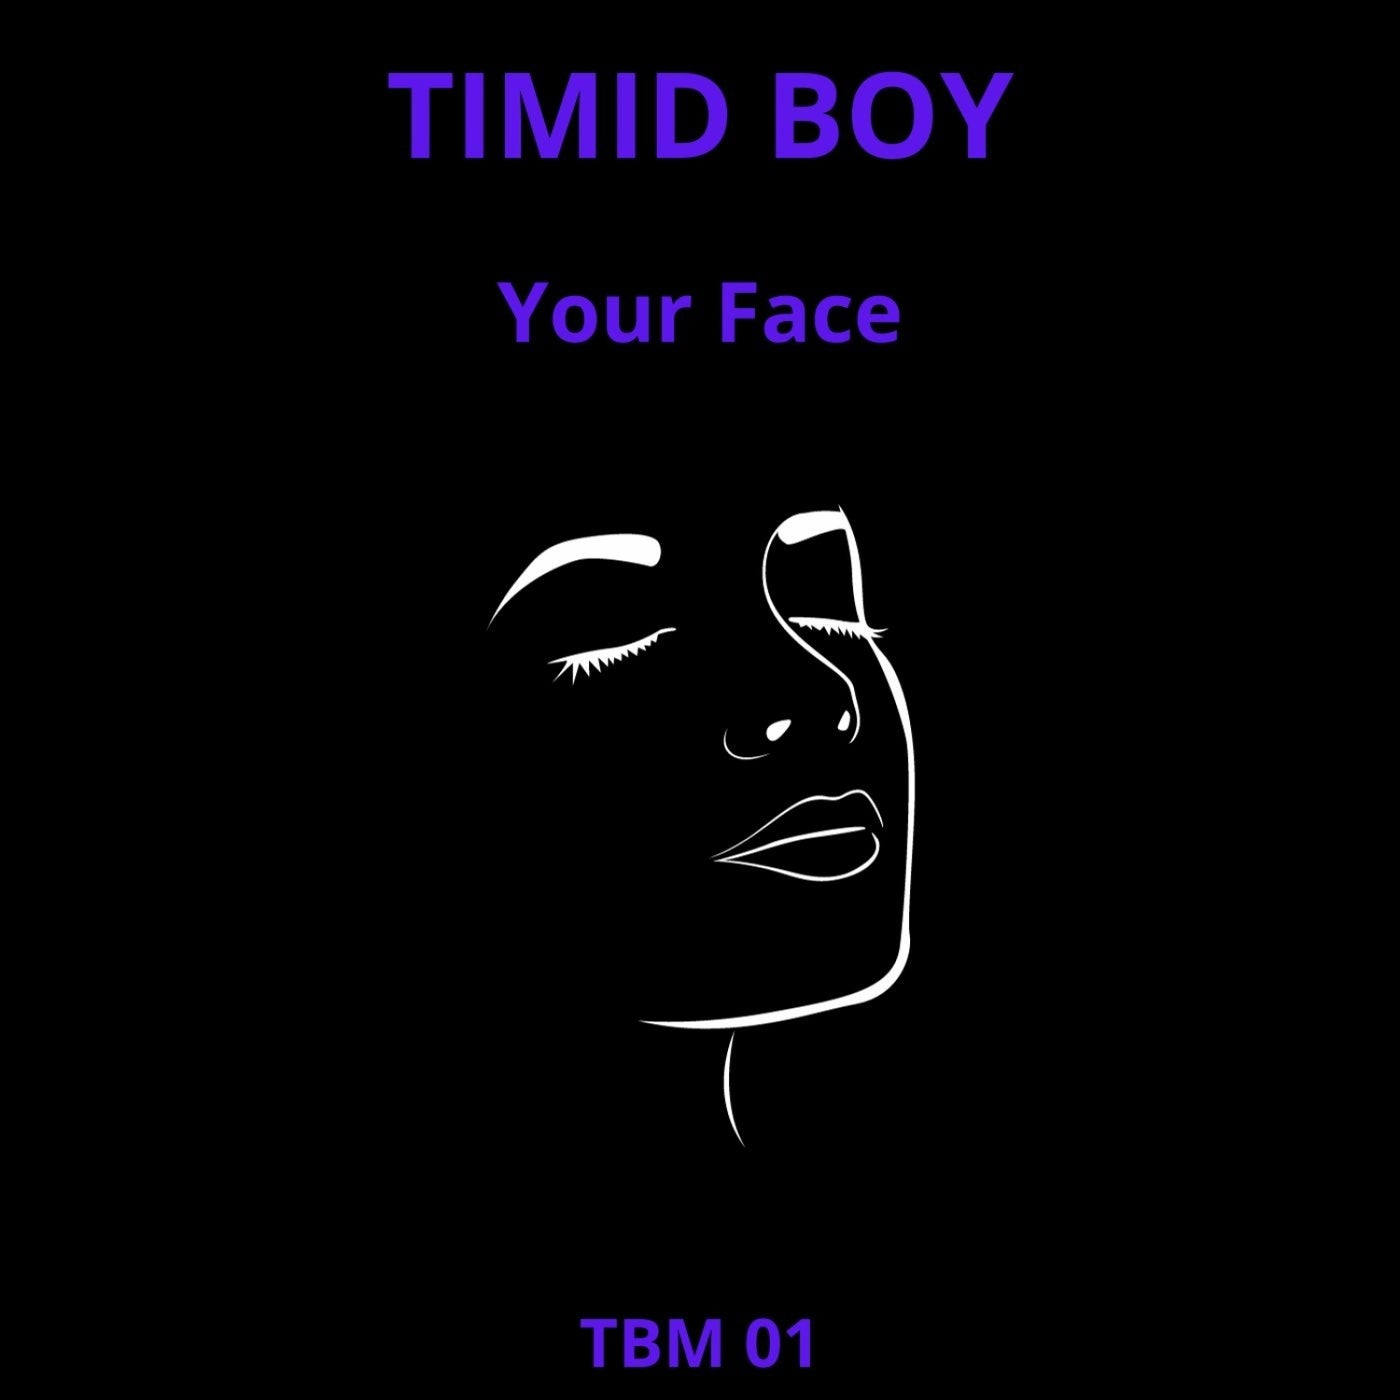 Your Face EP